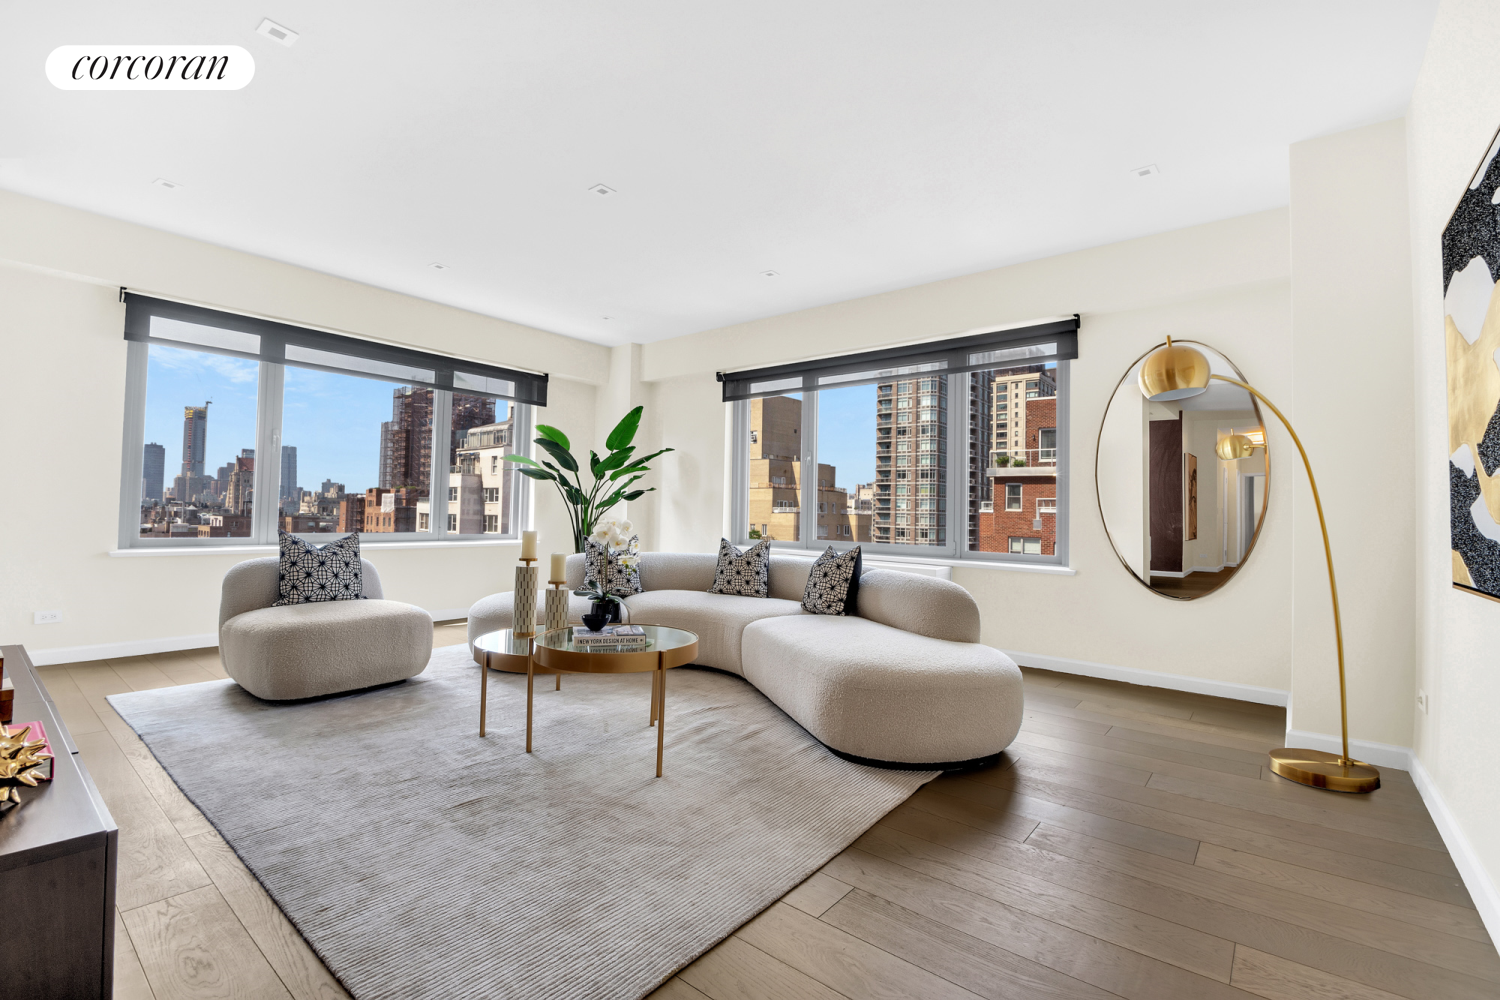 200 East 62nd Street 19A, Lenox Hill, Upper East Side, NYC - 3 Bedrooms  
3 Bathrooms  
6 Rooms - 